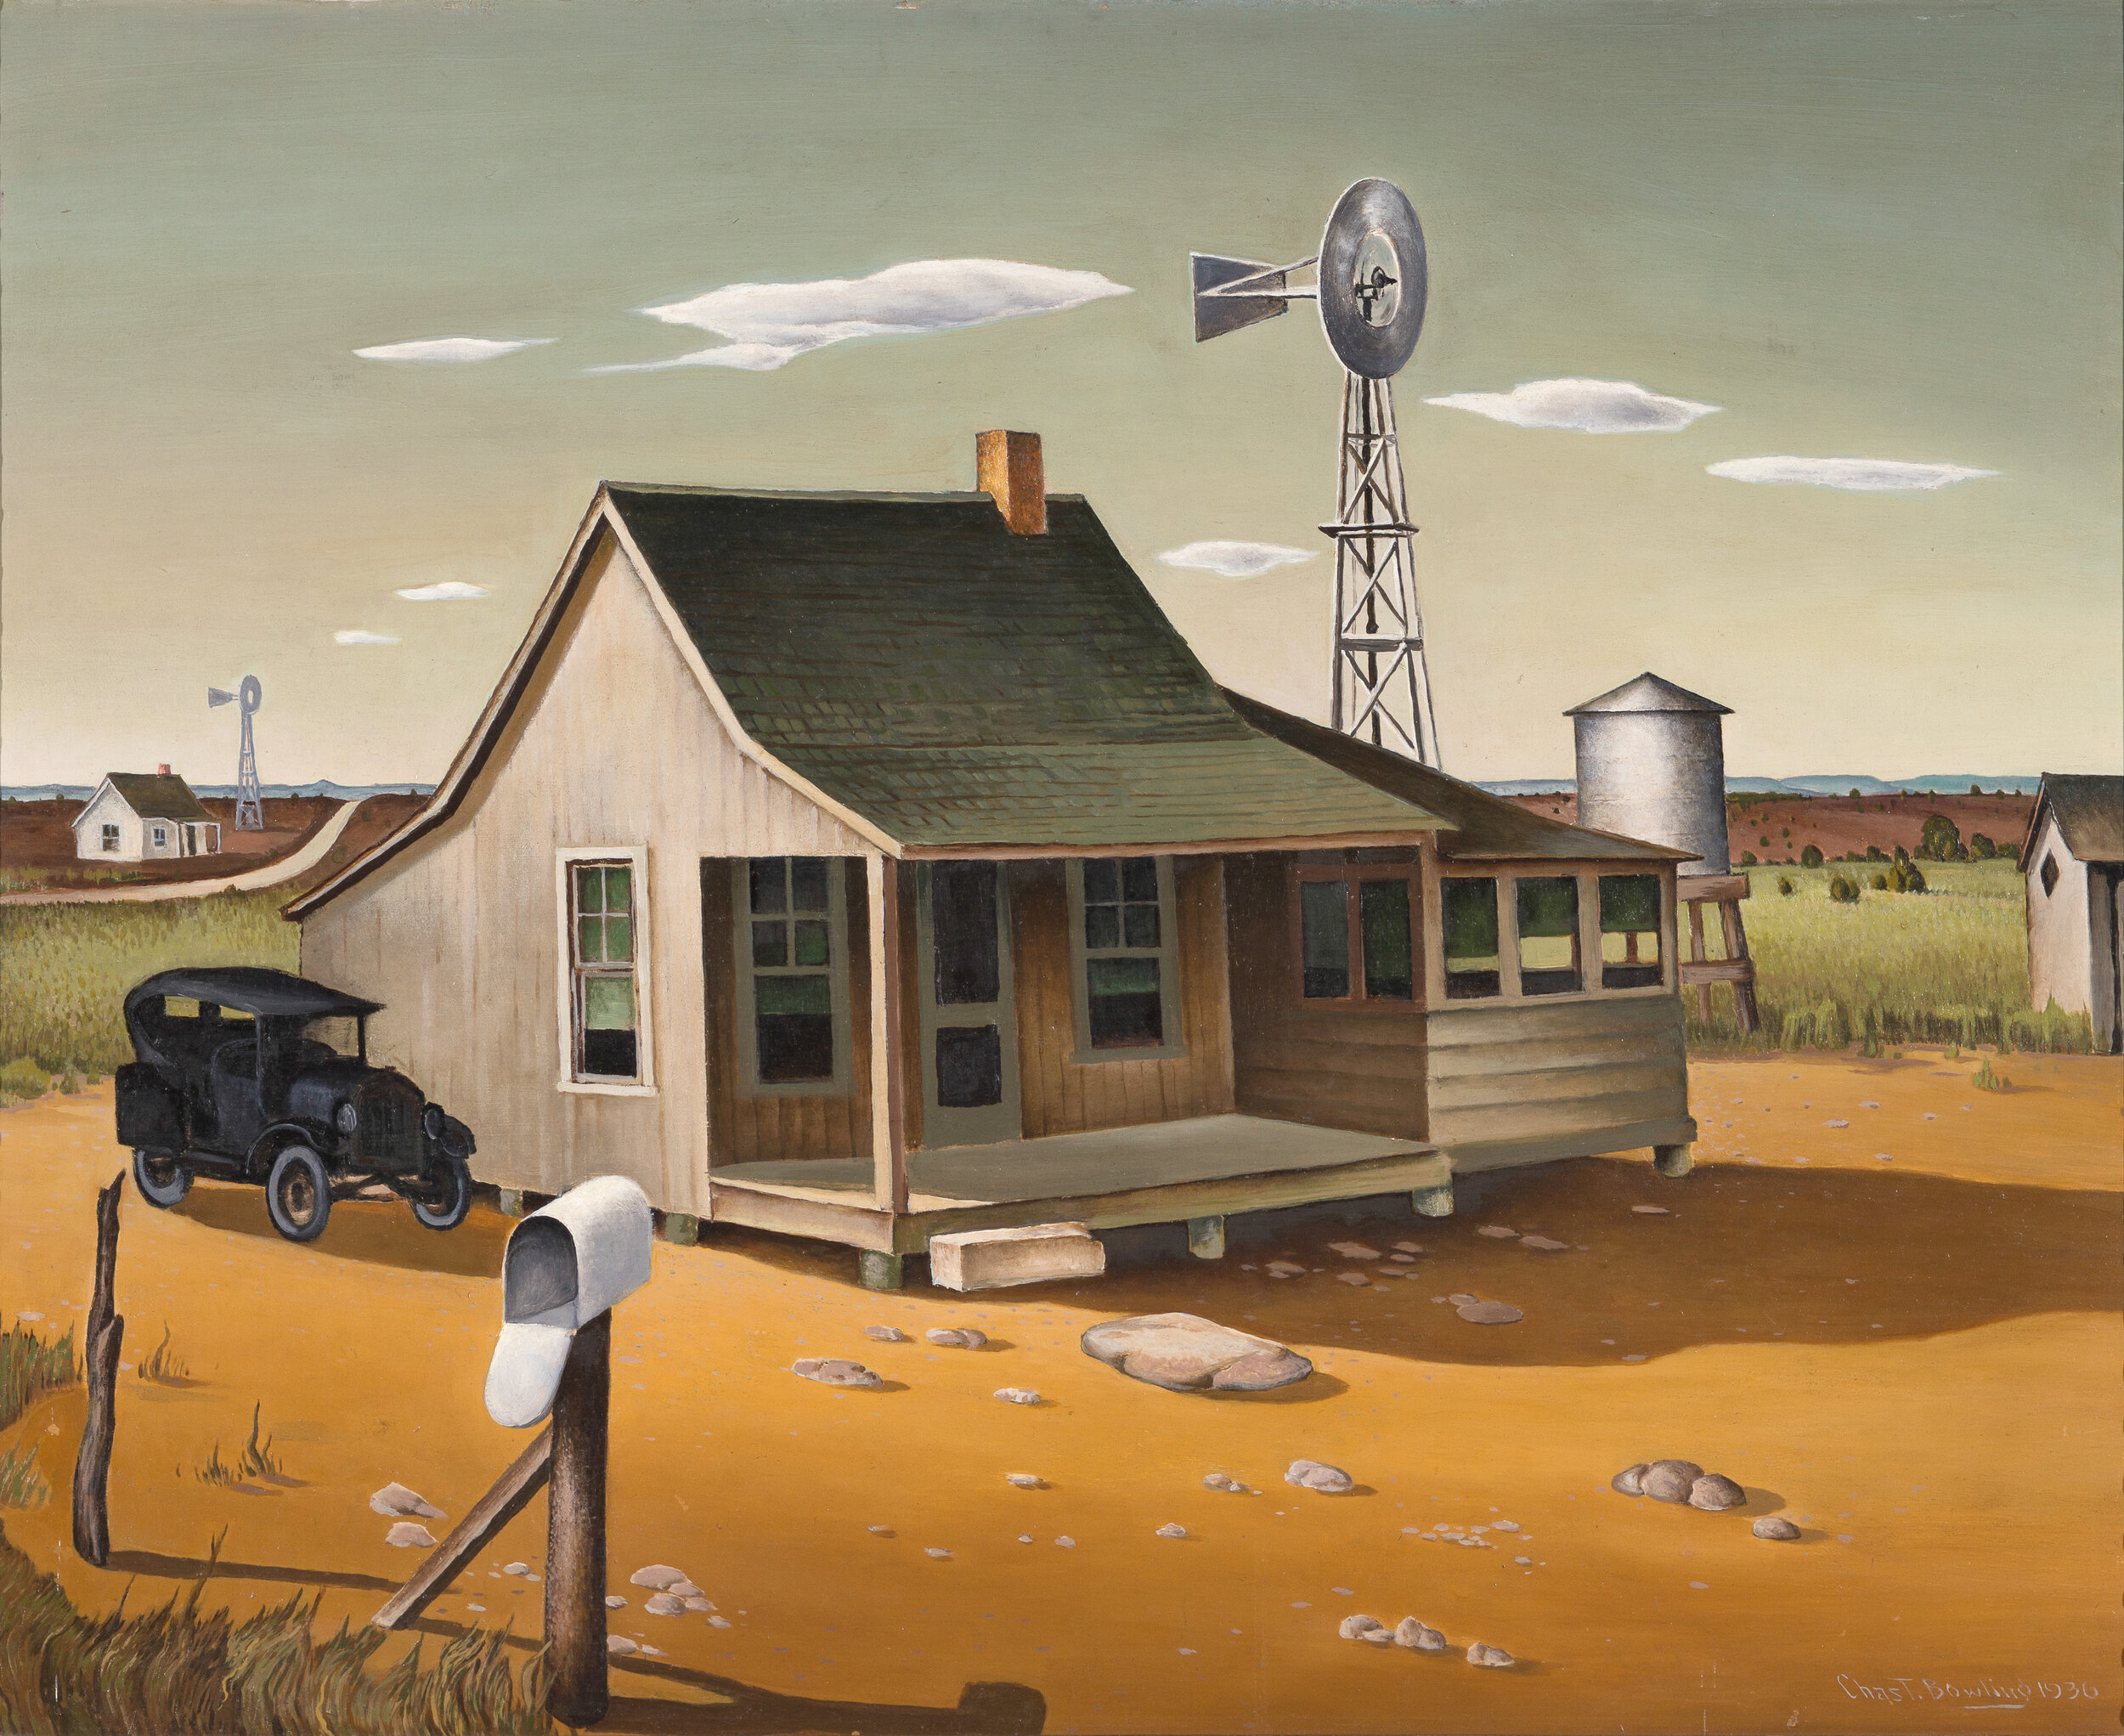 CHARLES T. BOWLING, Texas Landscape, 1936, oil on board, Gift of Claire Tate.